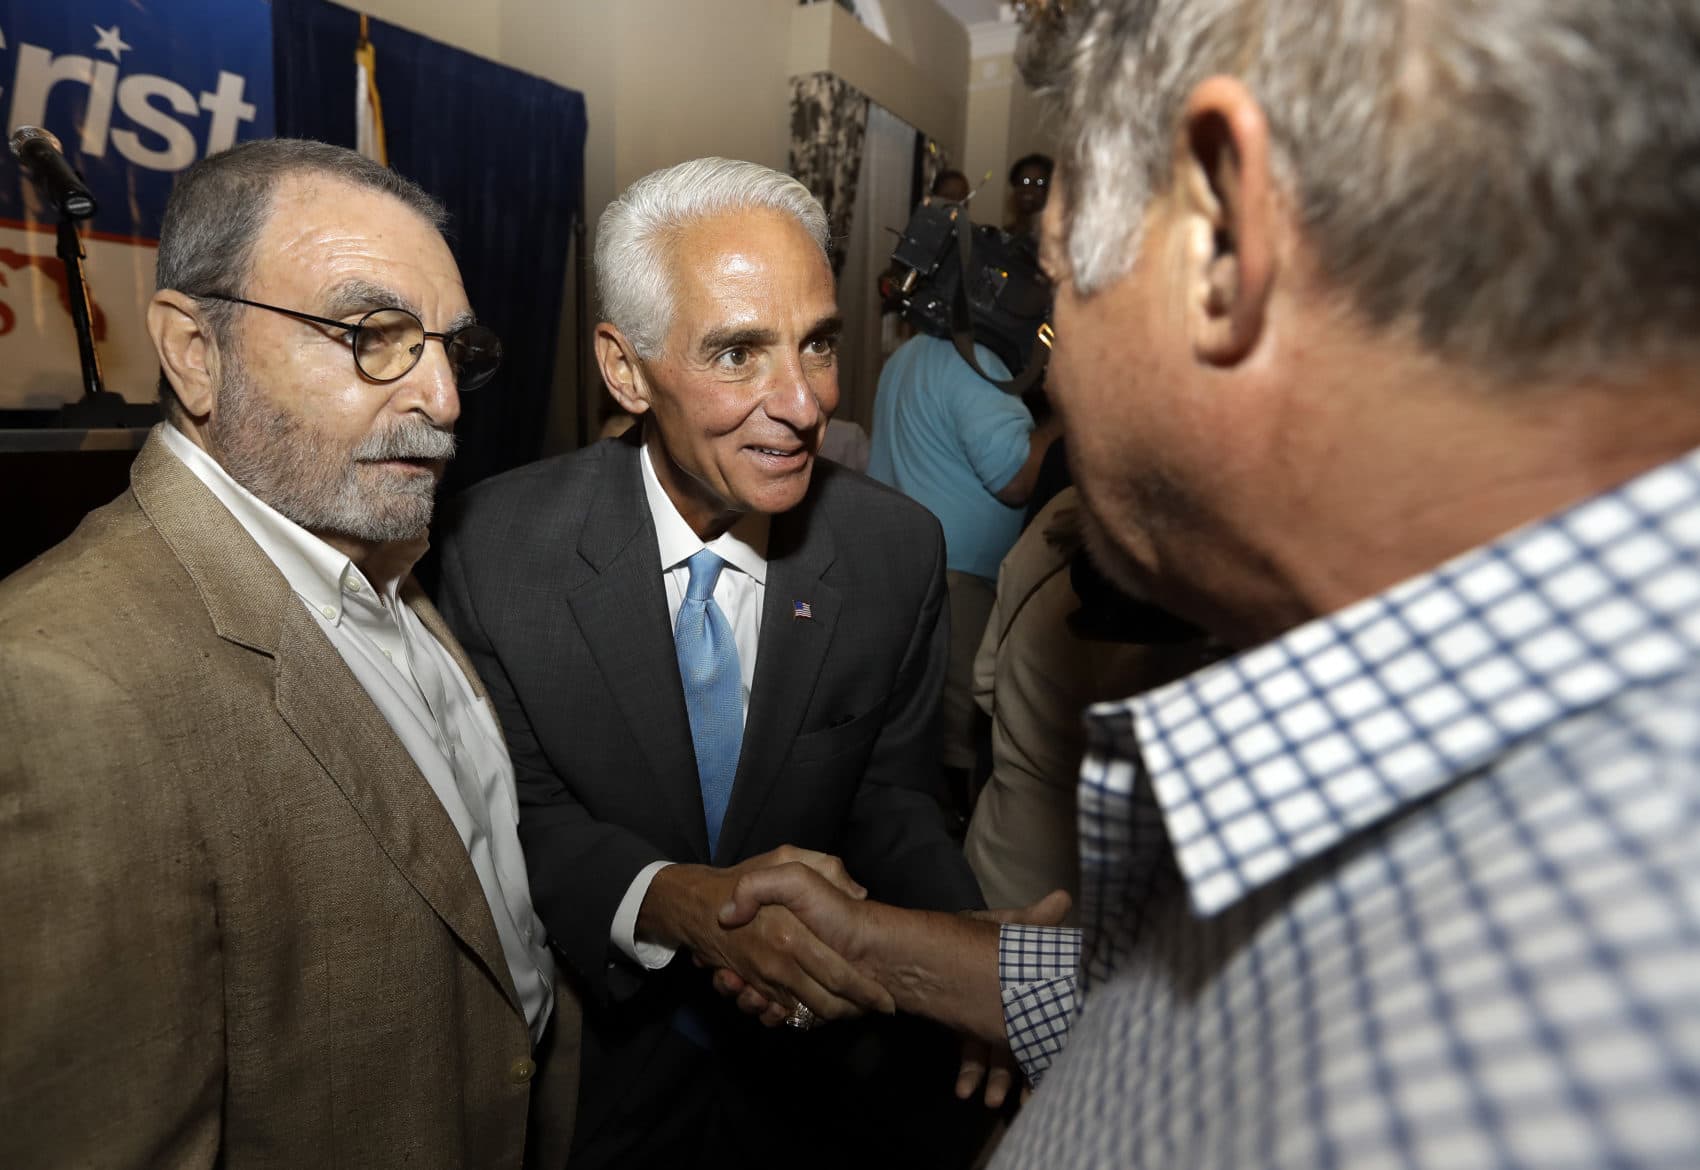 Rep. Charlie Crist, D-Fla., center, shakes hands with supporters after being elected to the U.S. House of Representatives Tuesday, Nov. 8, 2016, in St. Pete Beach, Fla. (Chris O'Meara/AP)